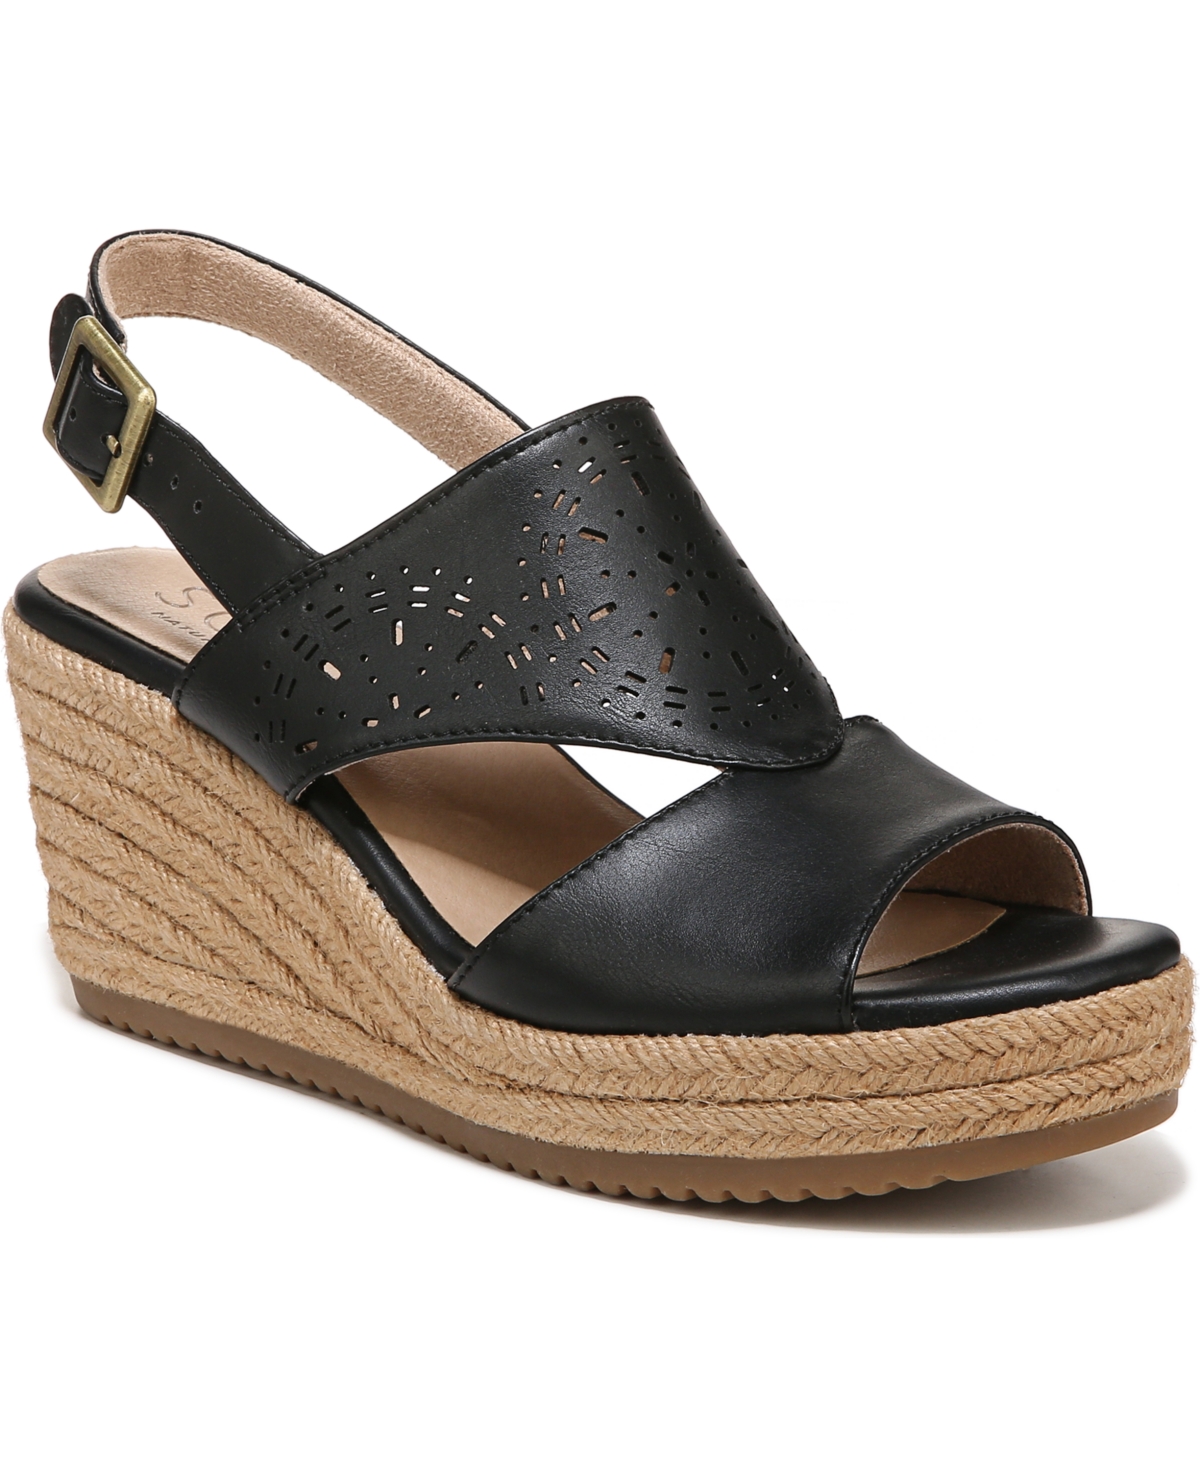 Soul Naturalizer Ocean Slingback Wedge Sandals Women's Shoes In Black Smooth Faux Leather